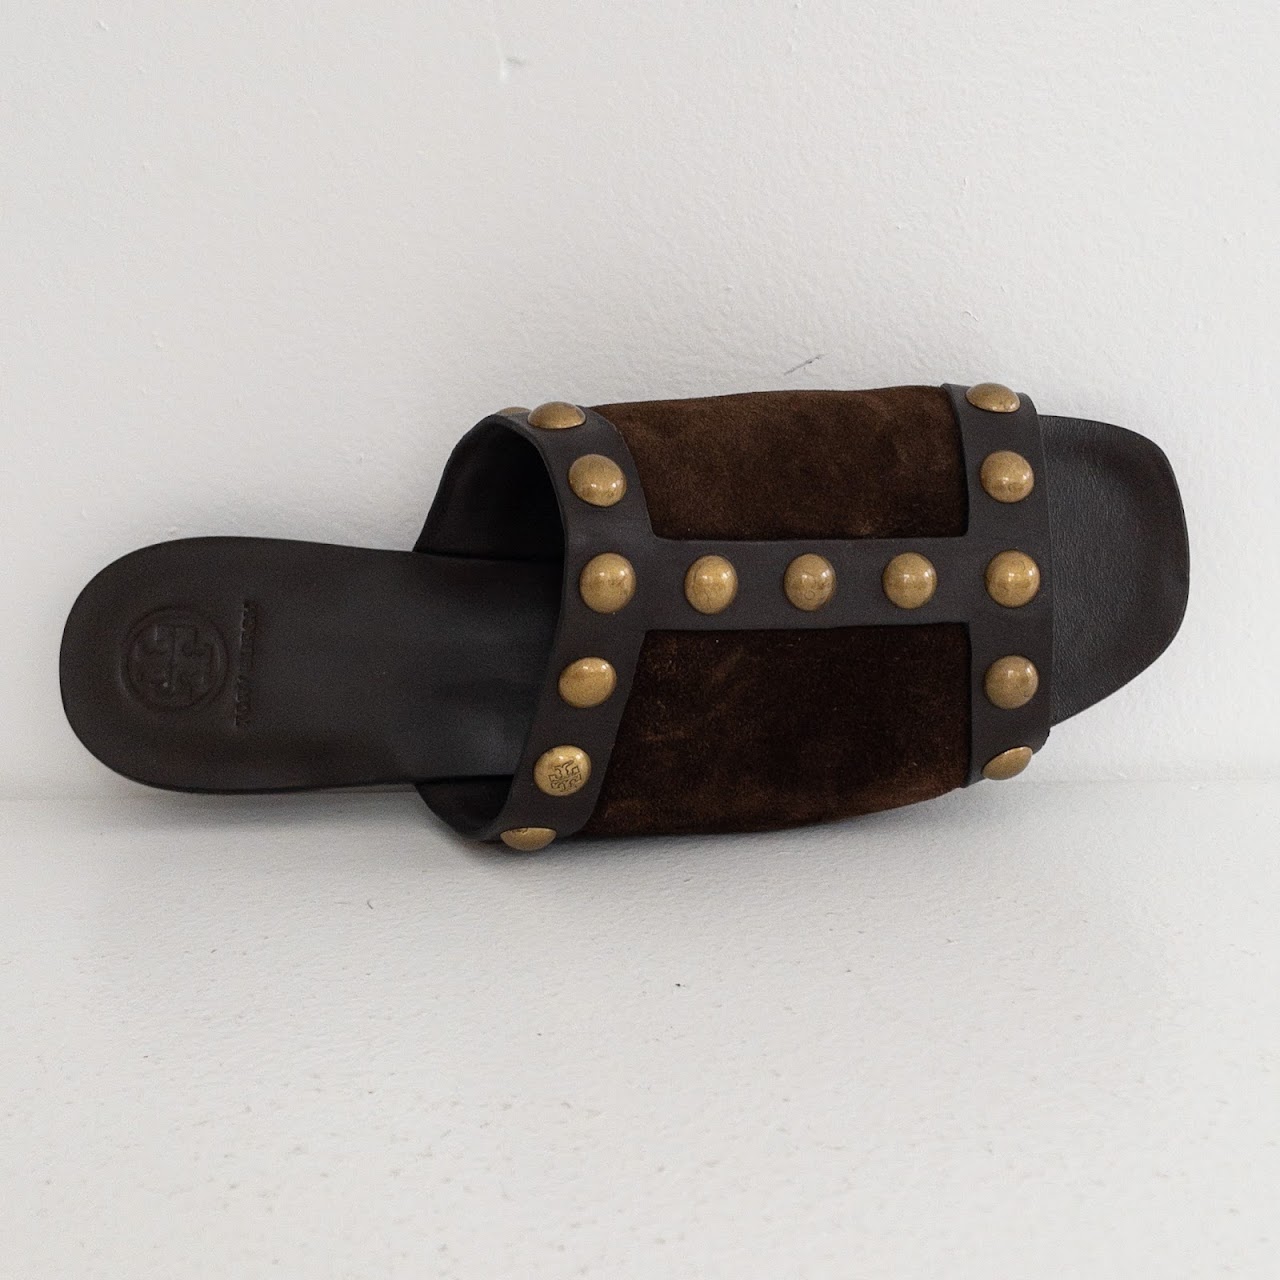 Tory Burch Suede Slides